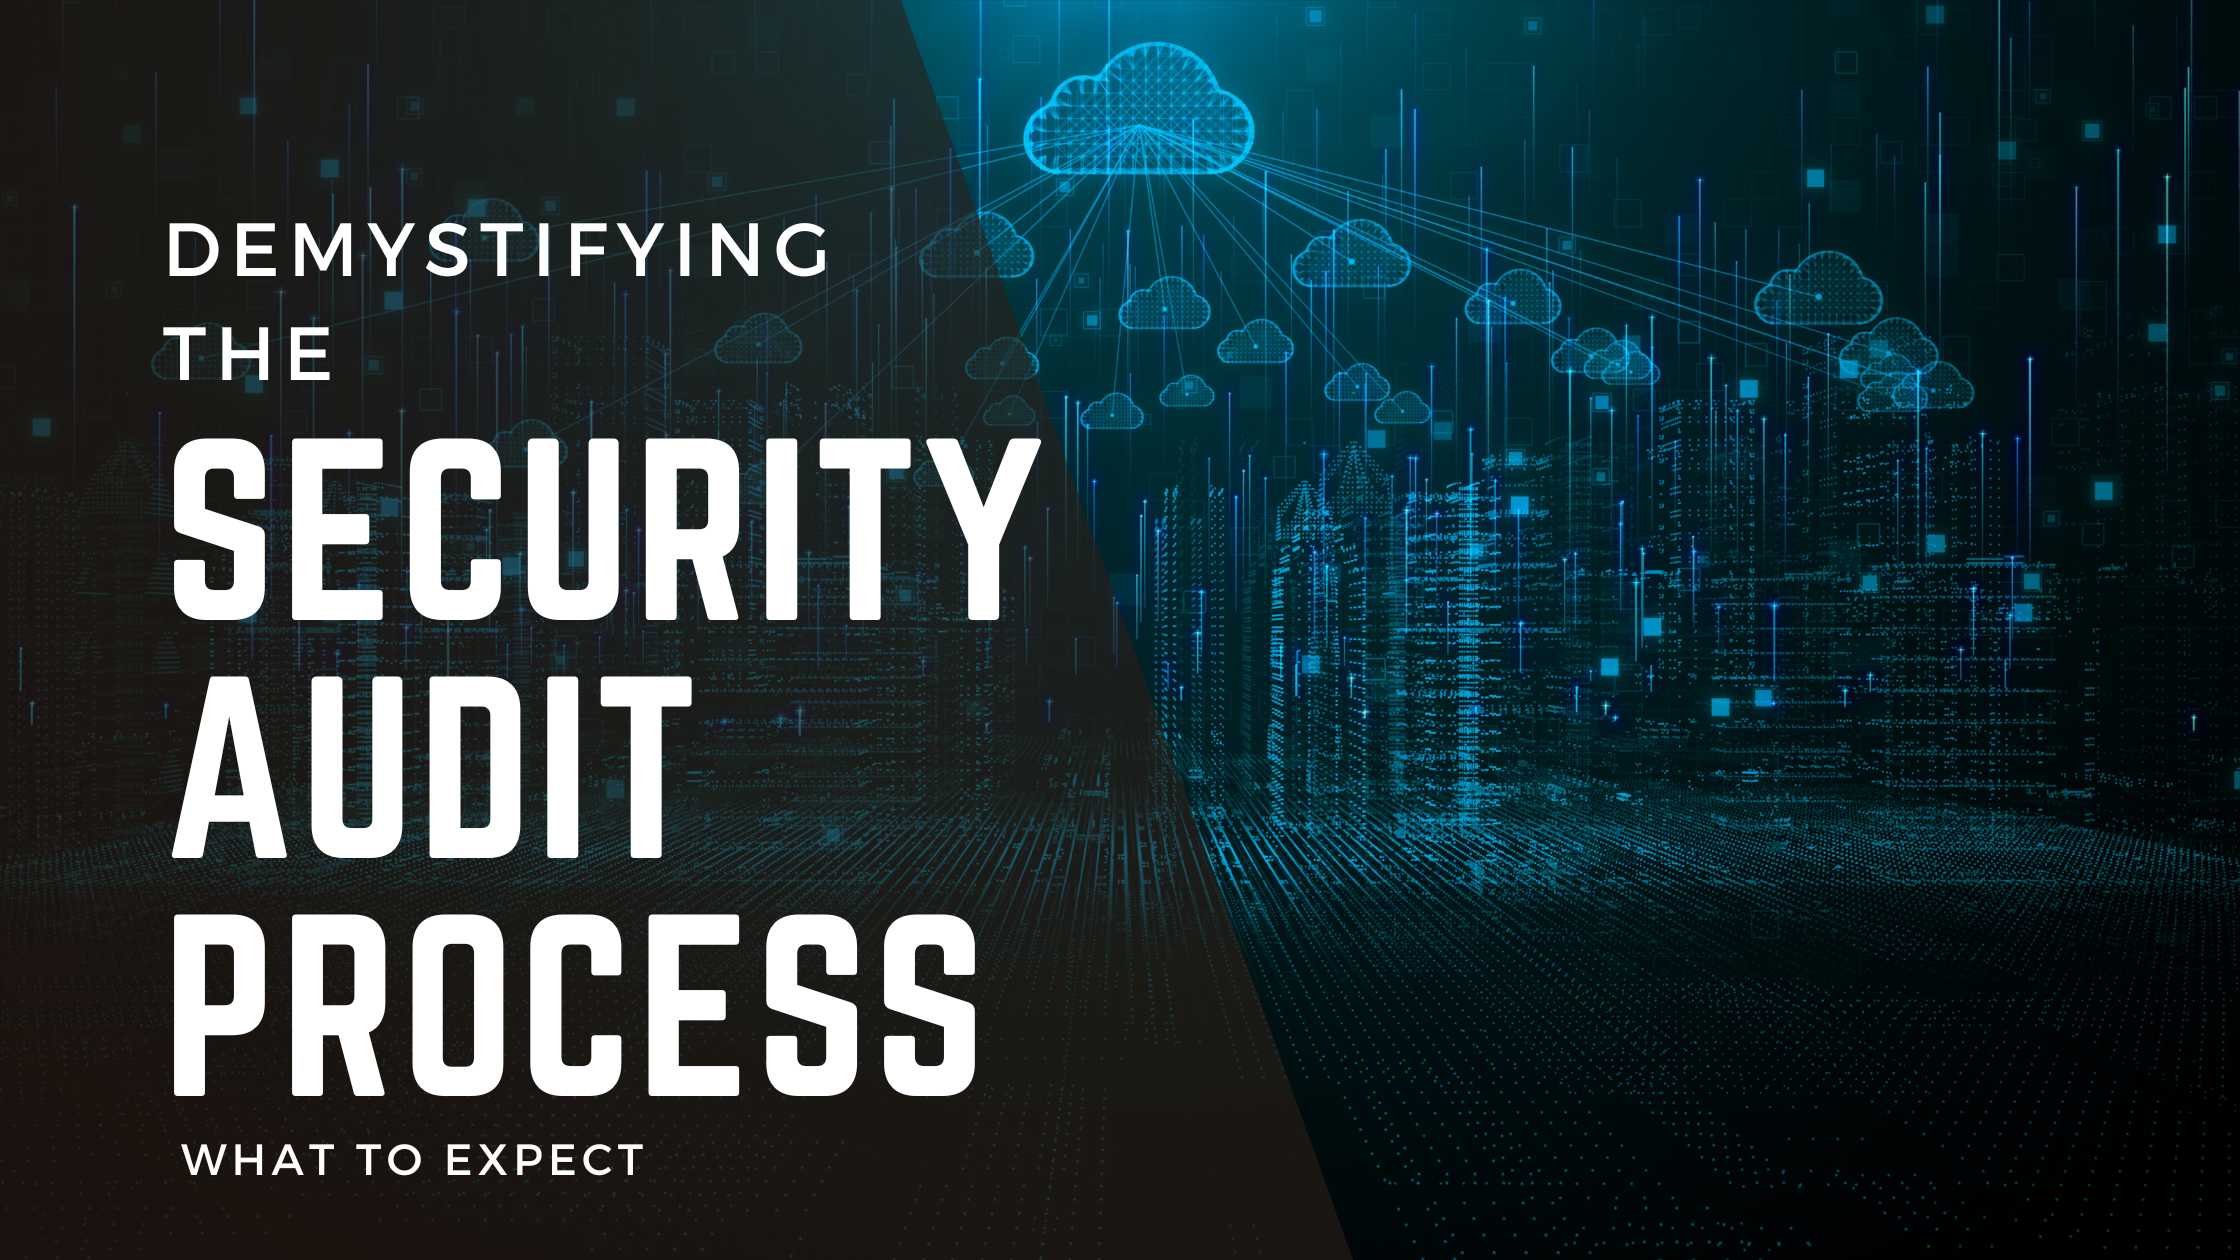 Demystifying the Security Audit Process: What to Expect